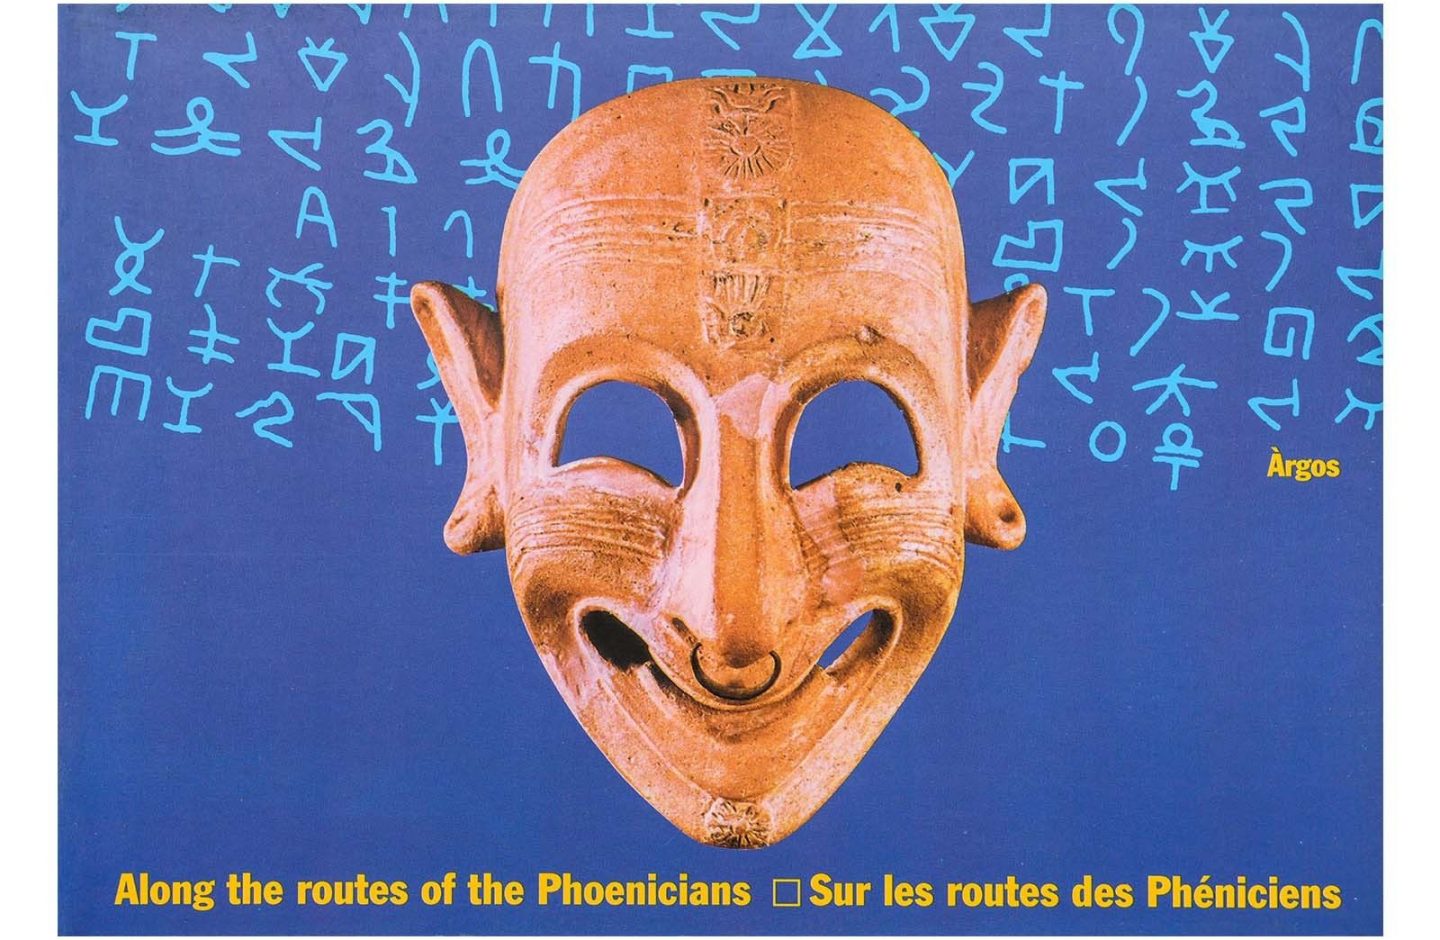 Along the routes of the Phoenicians